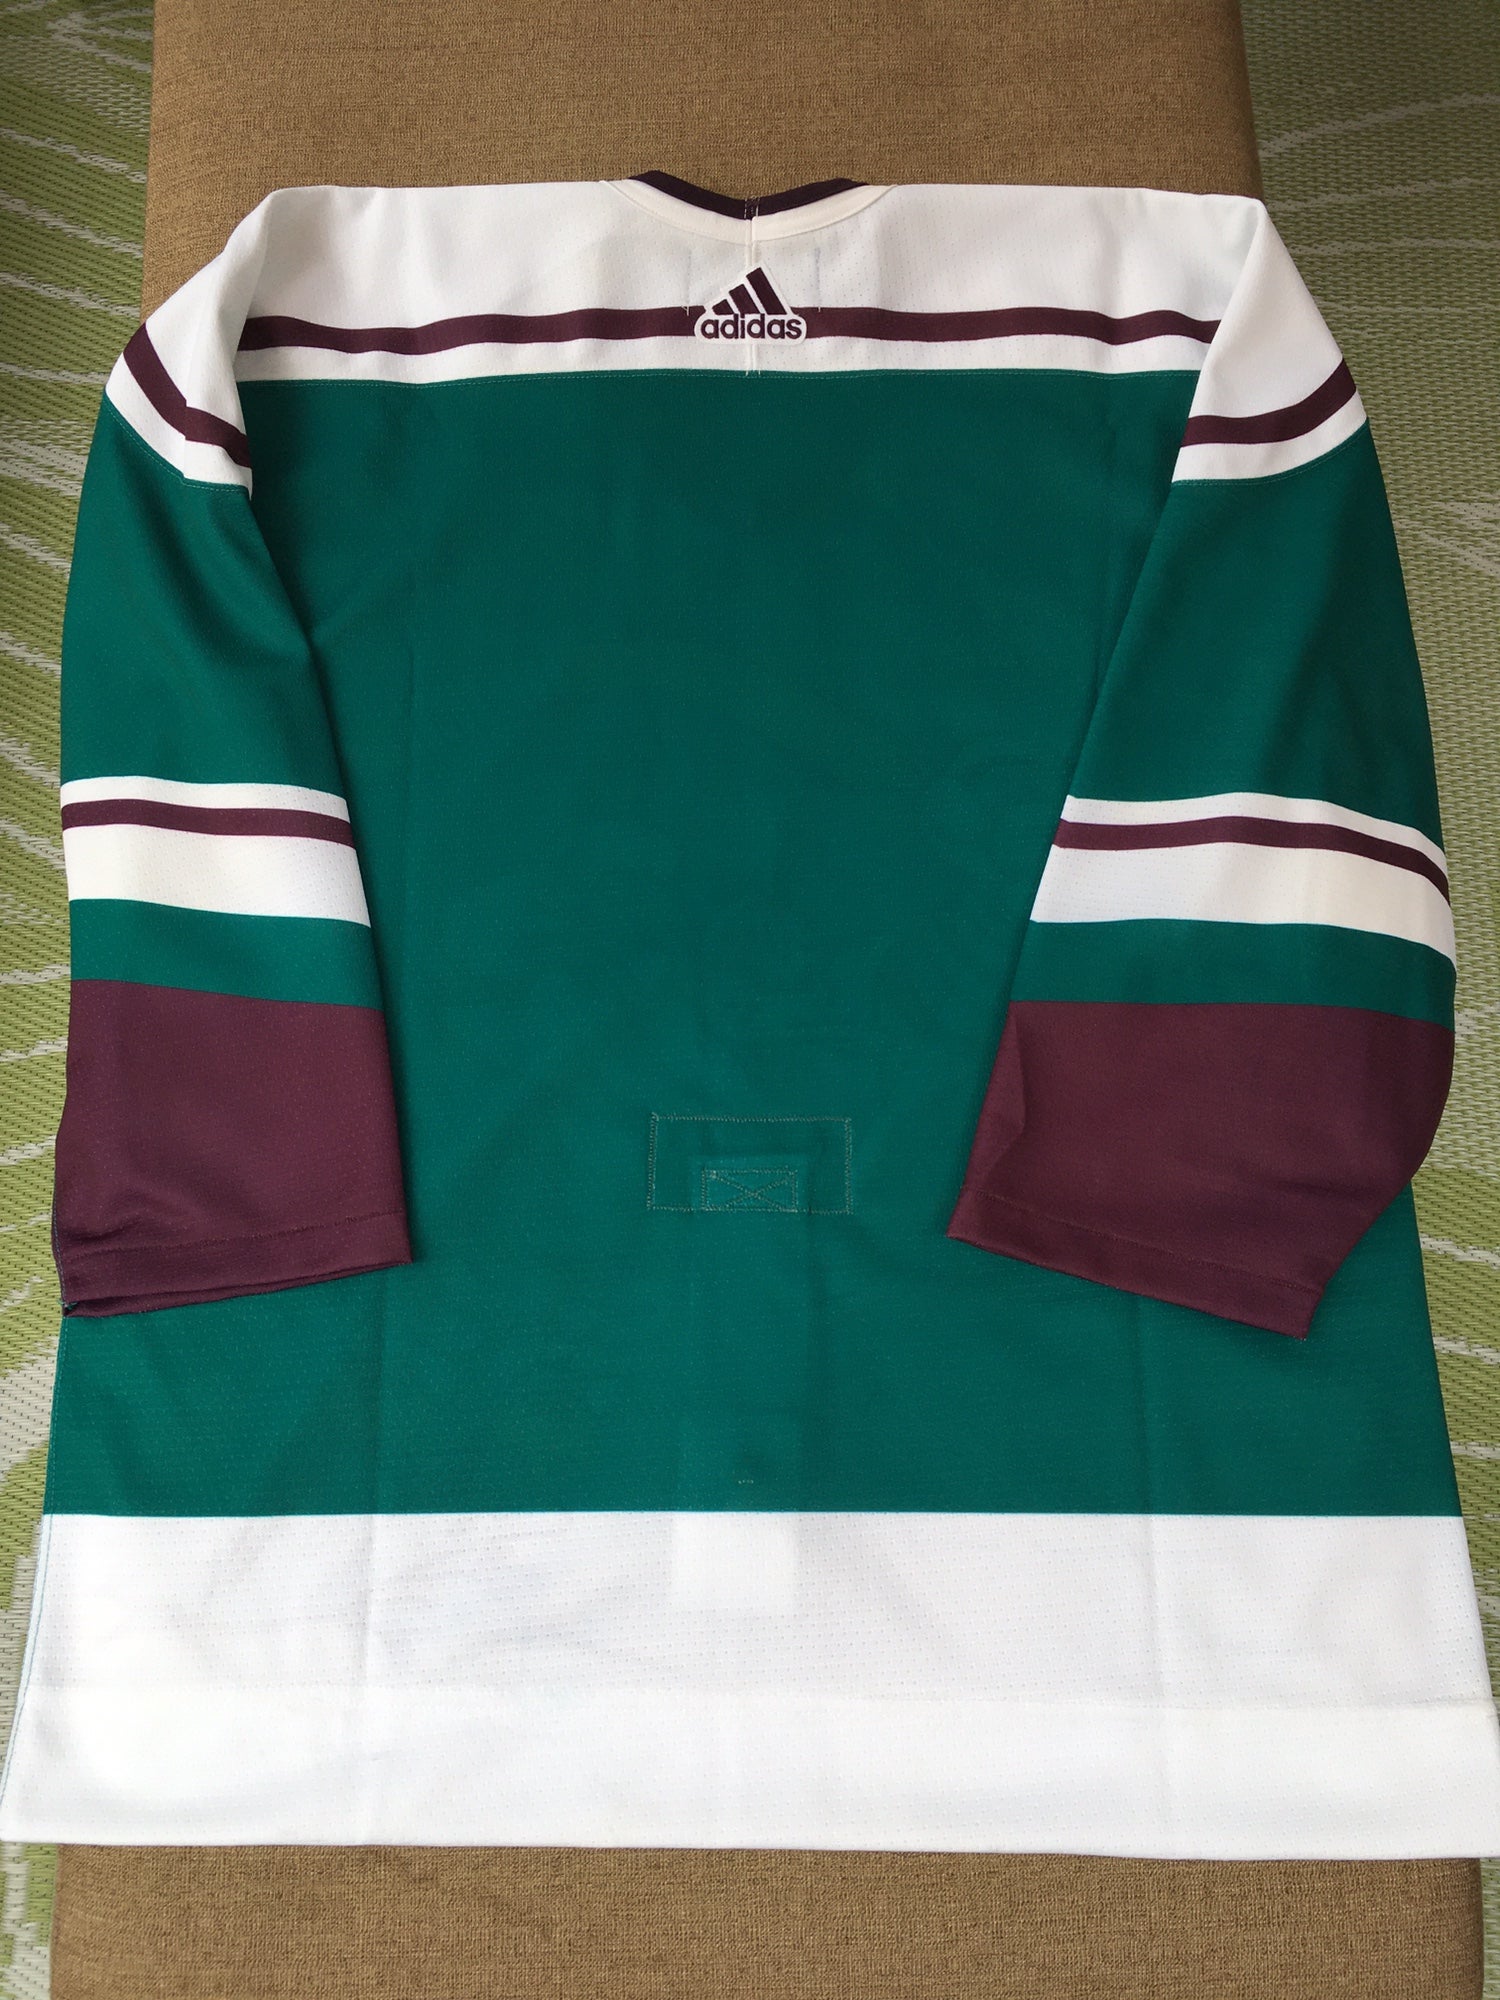 Authentic Adidas PERRY Mighty Ducks jersey Sz. 46